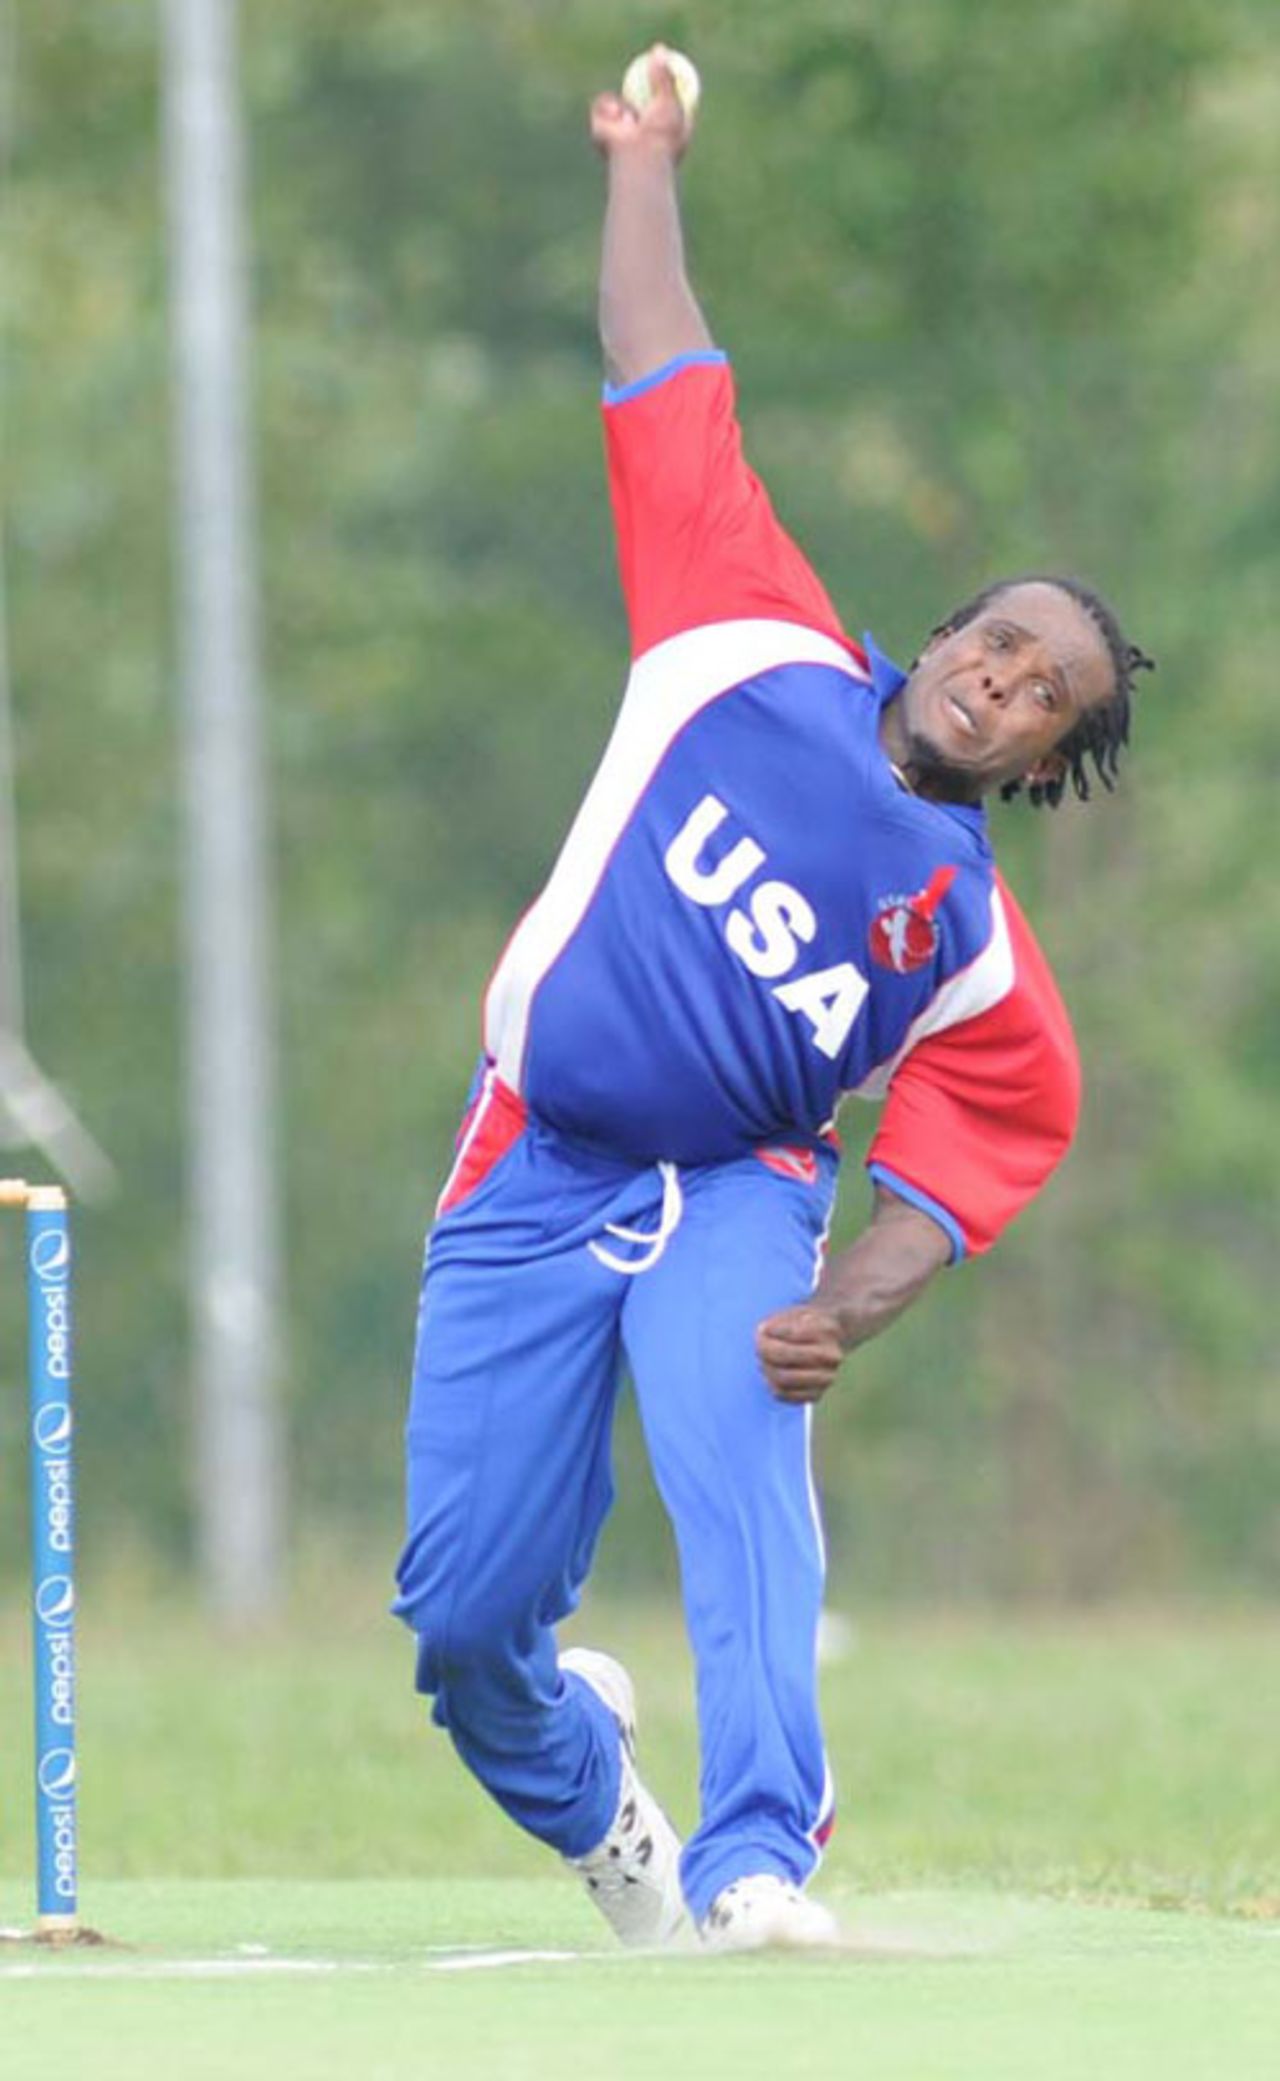 Adrian Gordon took four wickets, Italy v USA, ICC WCL Div. 4 final, Pianoro, August 21, 2010